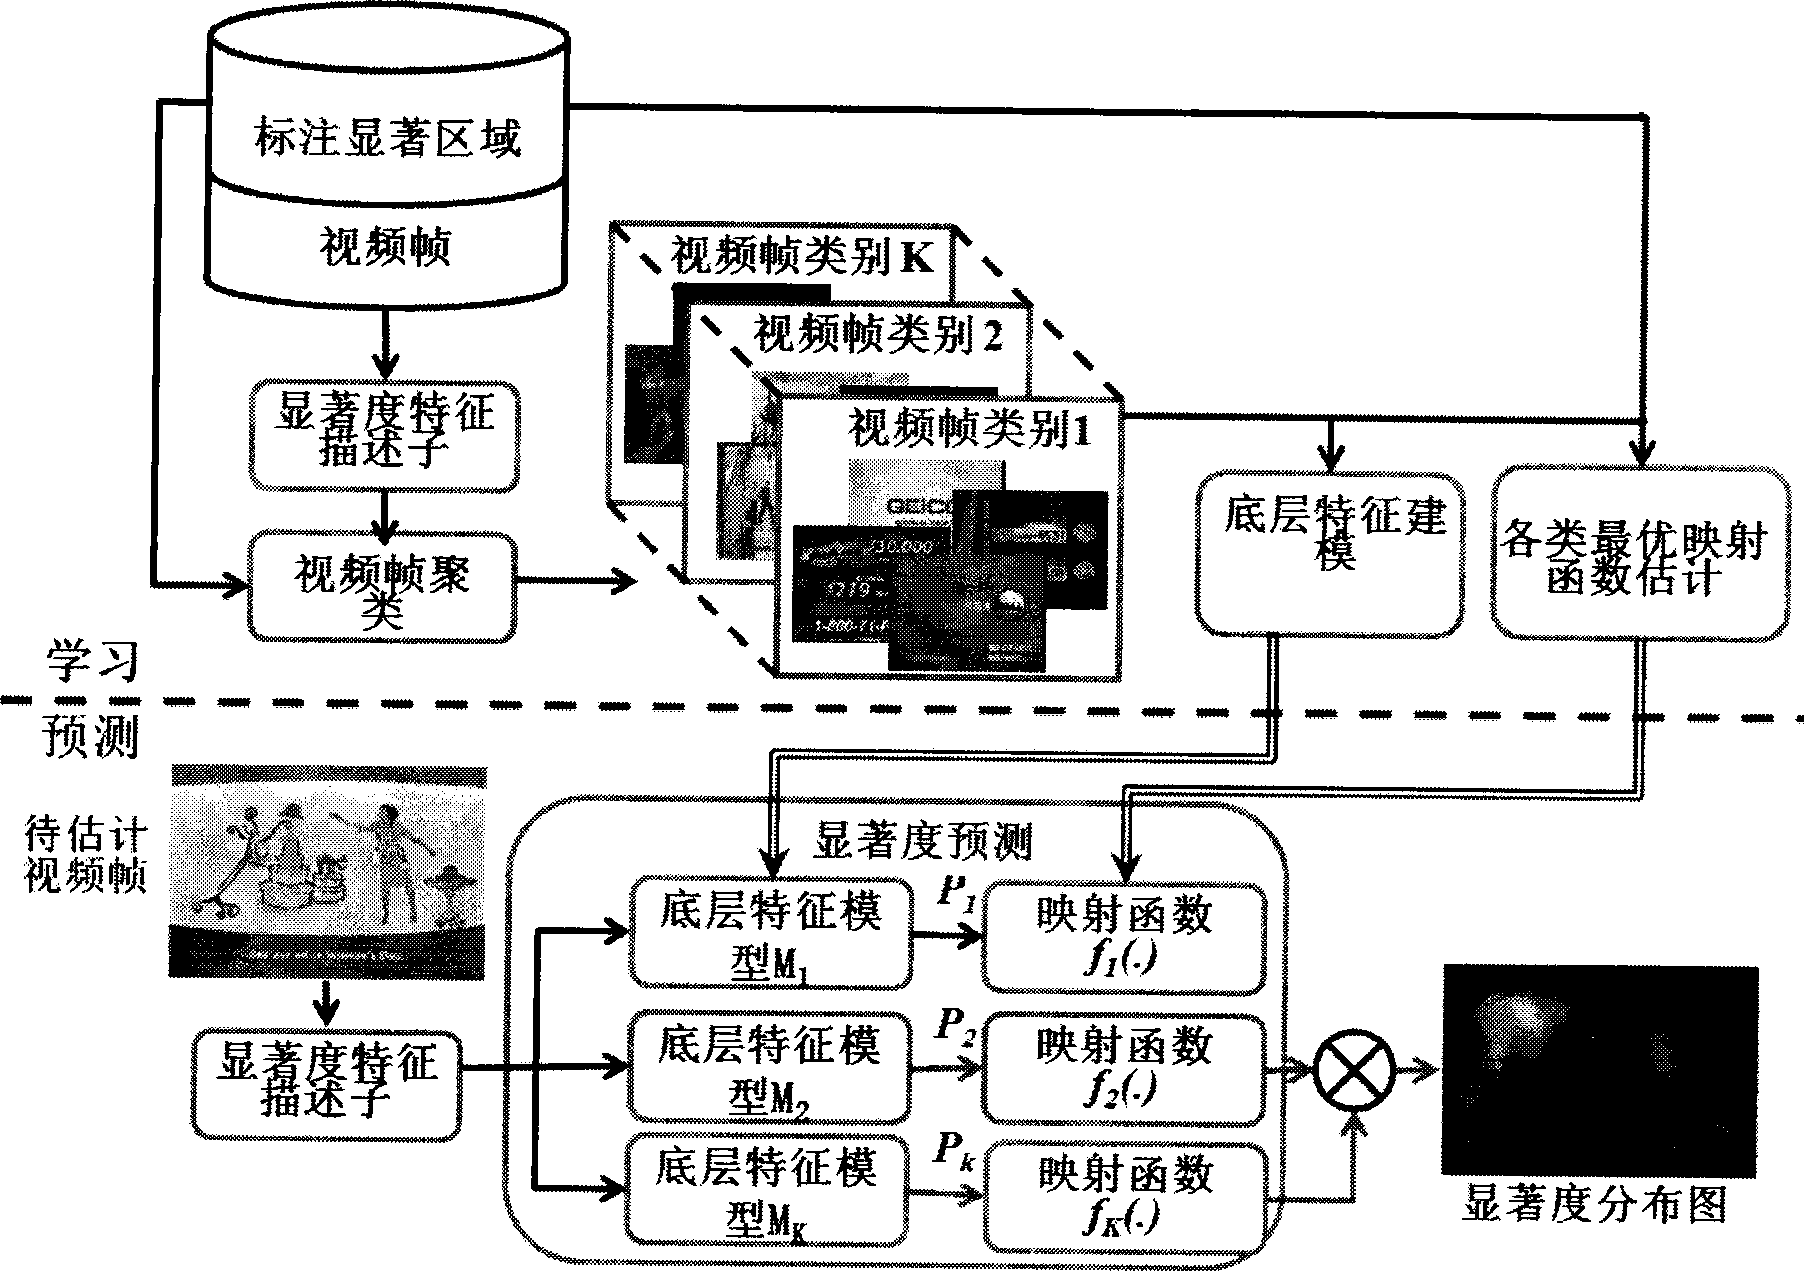 Method for automatically estimating visual significance of image and video